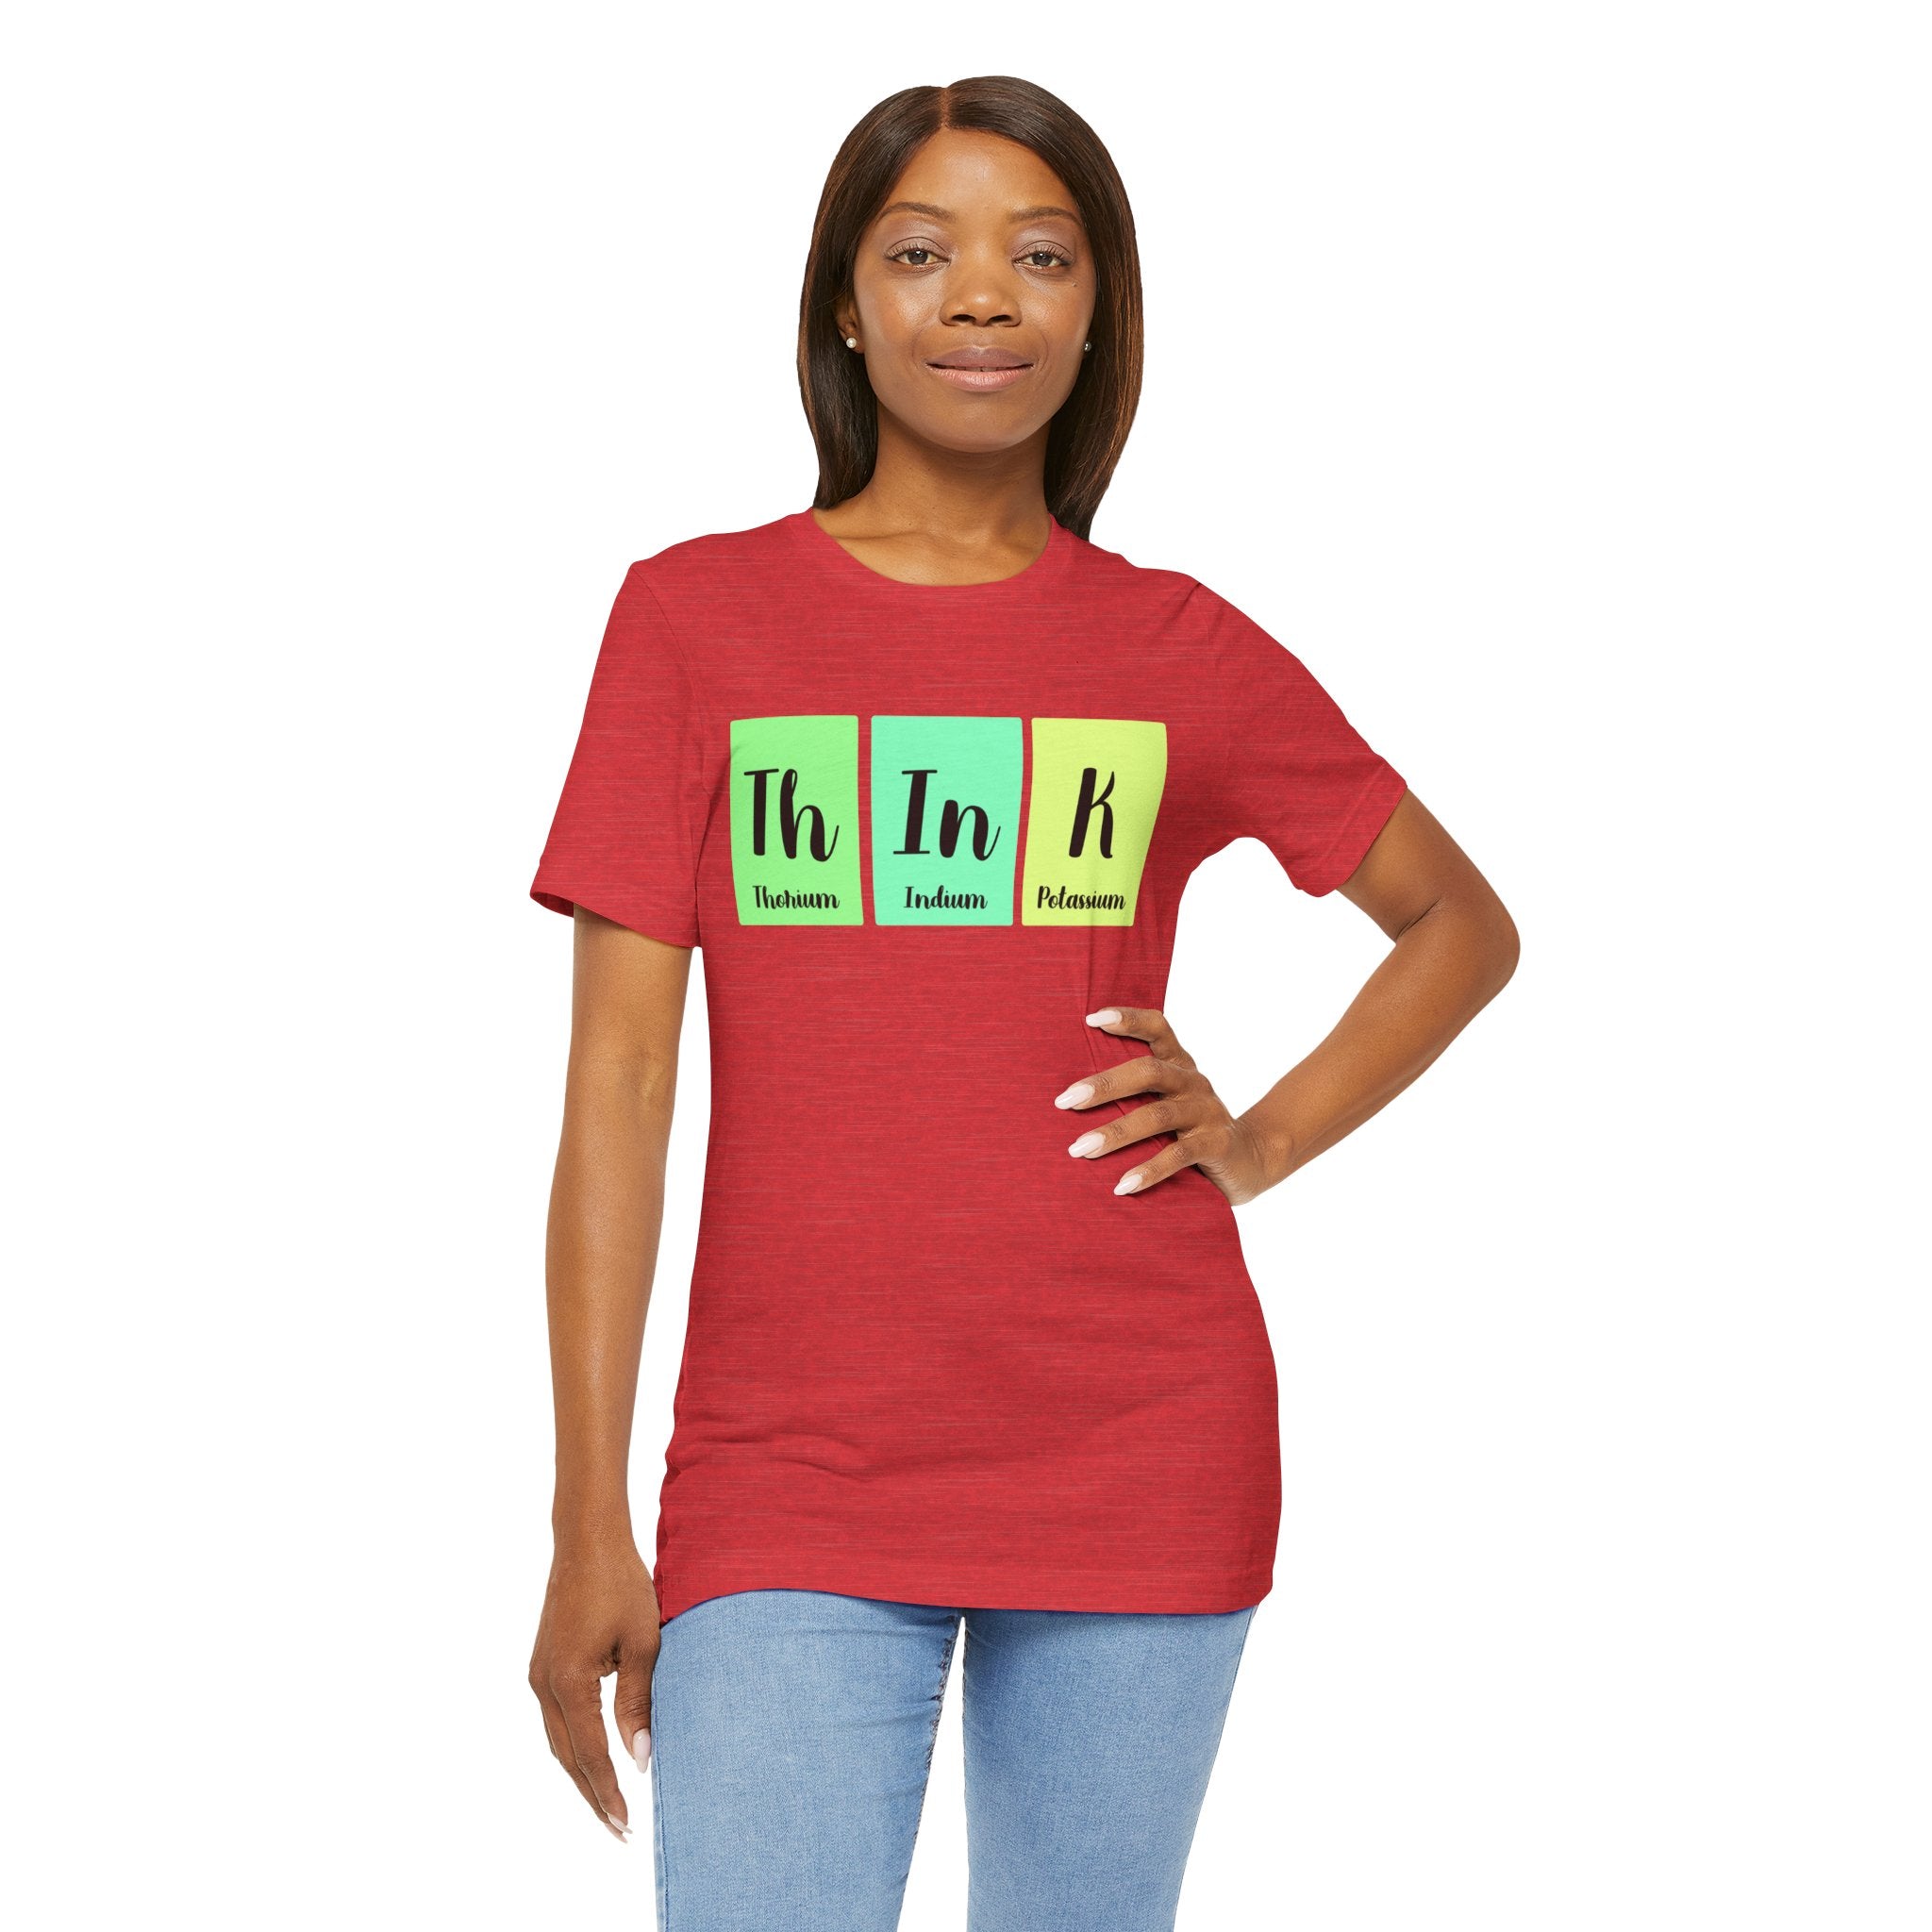 A woman in a Th-In-k red t-shirt with "th in k" printed in green, yellow, and blue blocks stands against a plain background.